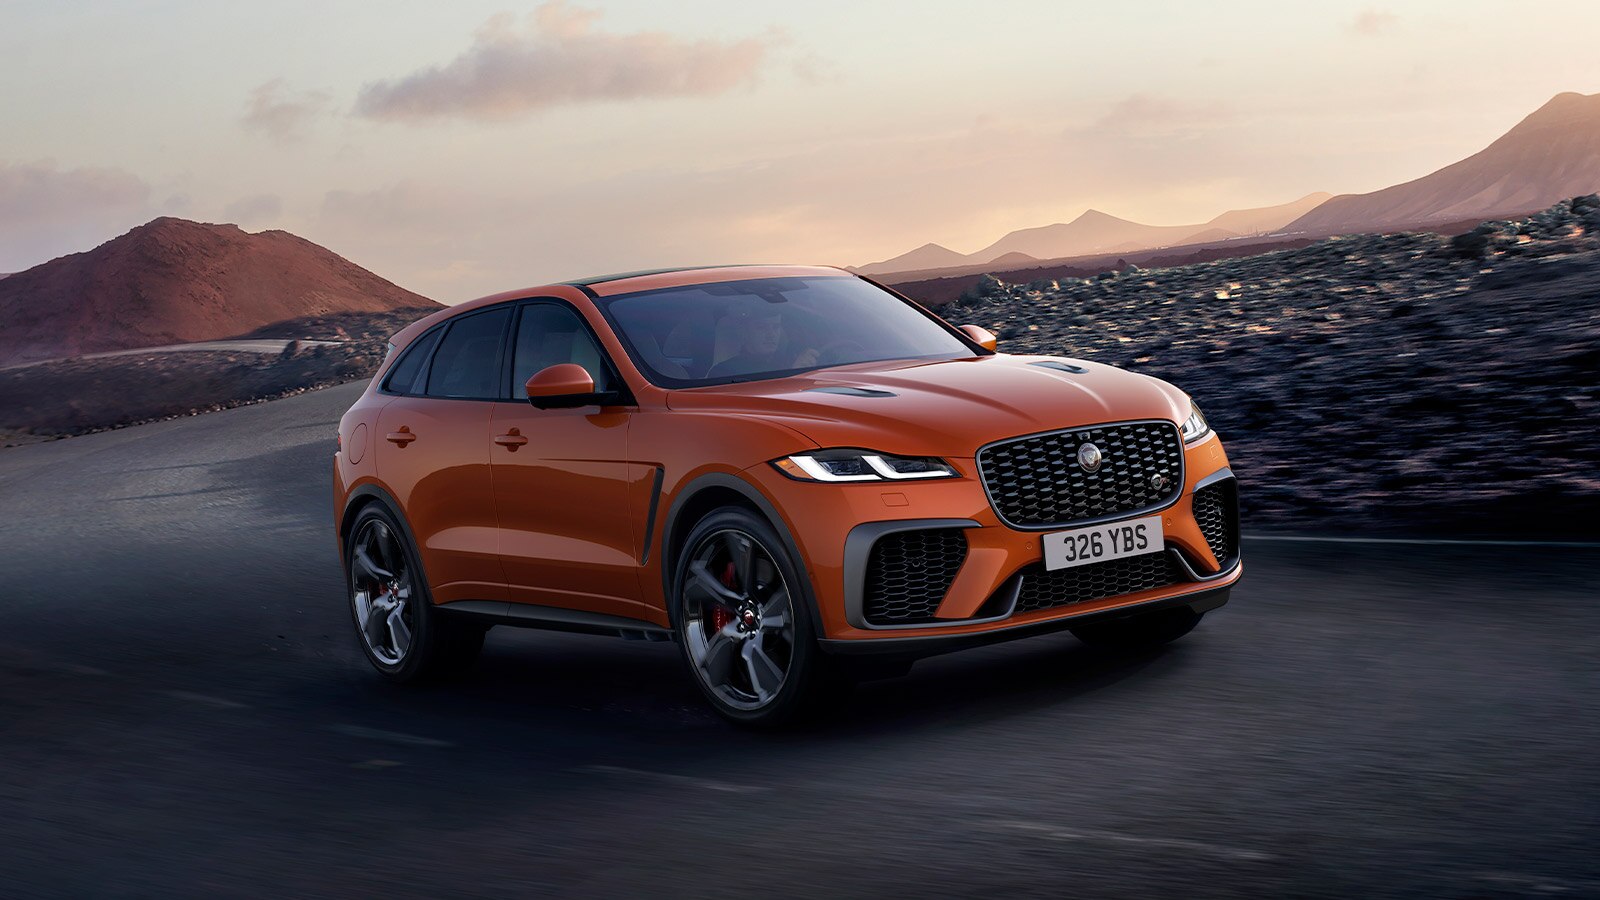 Visit Jaguar of Fort Myers for the latest in luxury car sales. We offer new and used Jaguar F-PACE's for sale near Fort Myers, Fl.